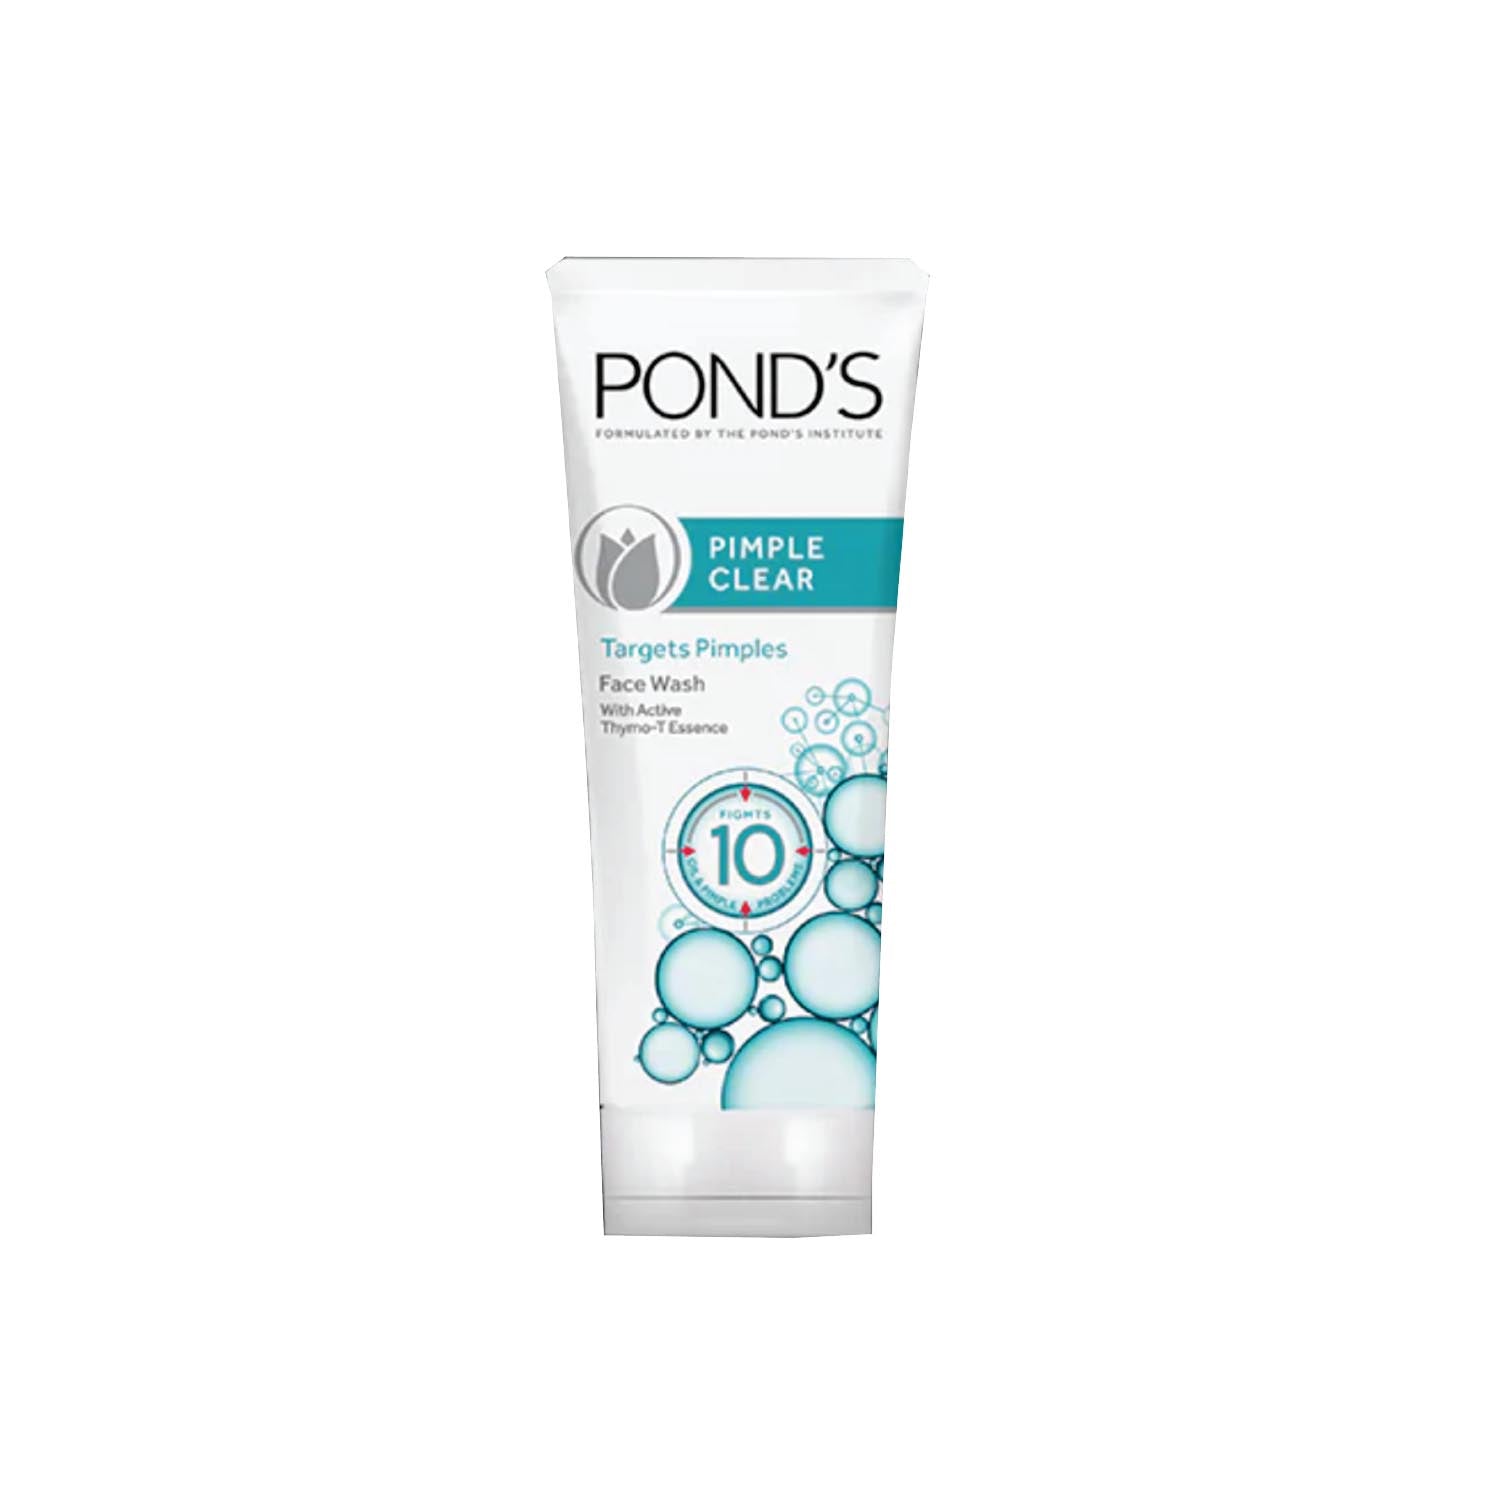 Pond's Pimple Clear Face Wash, 100ml